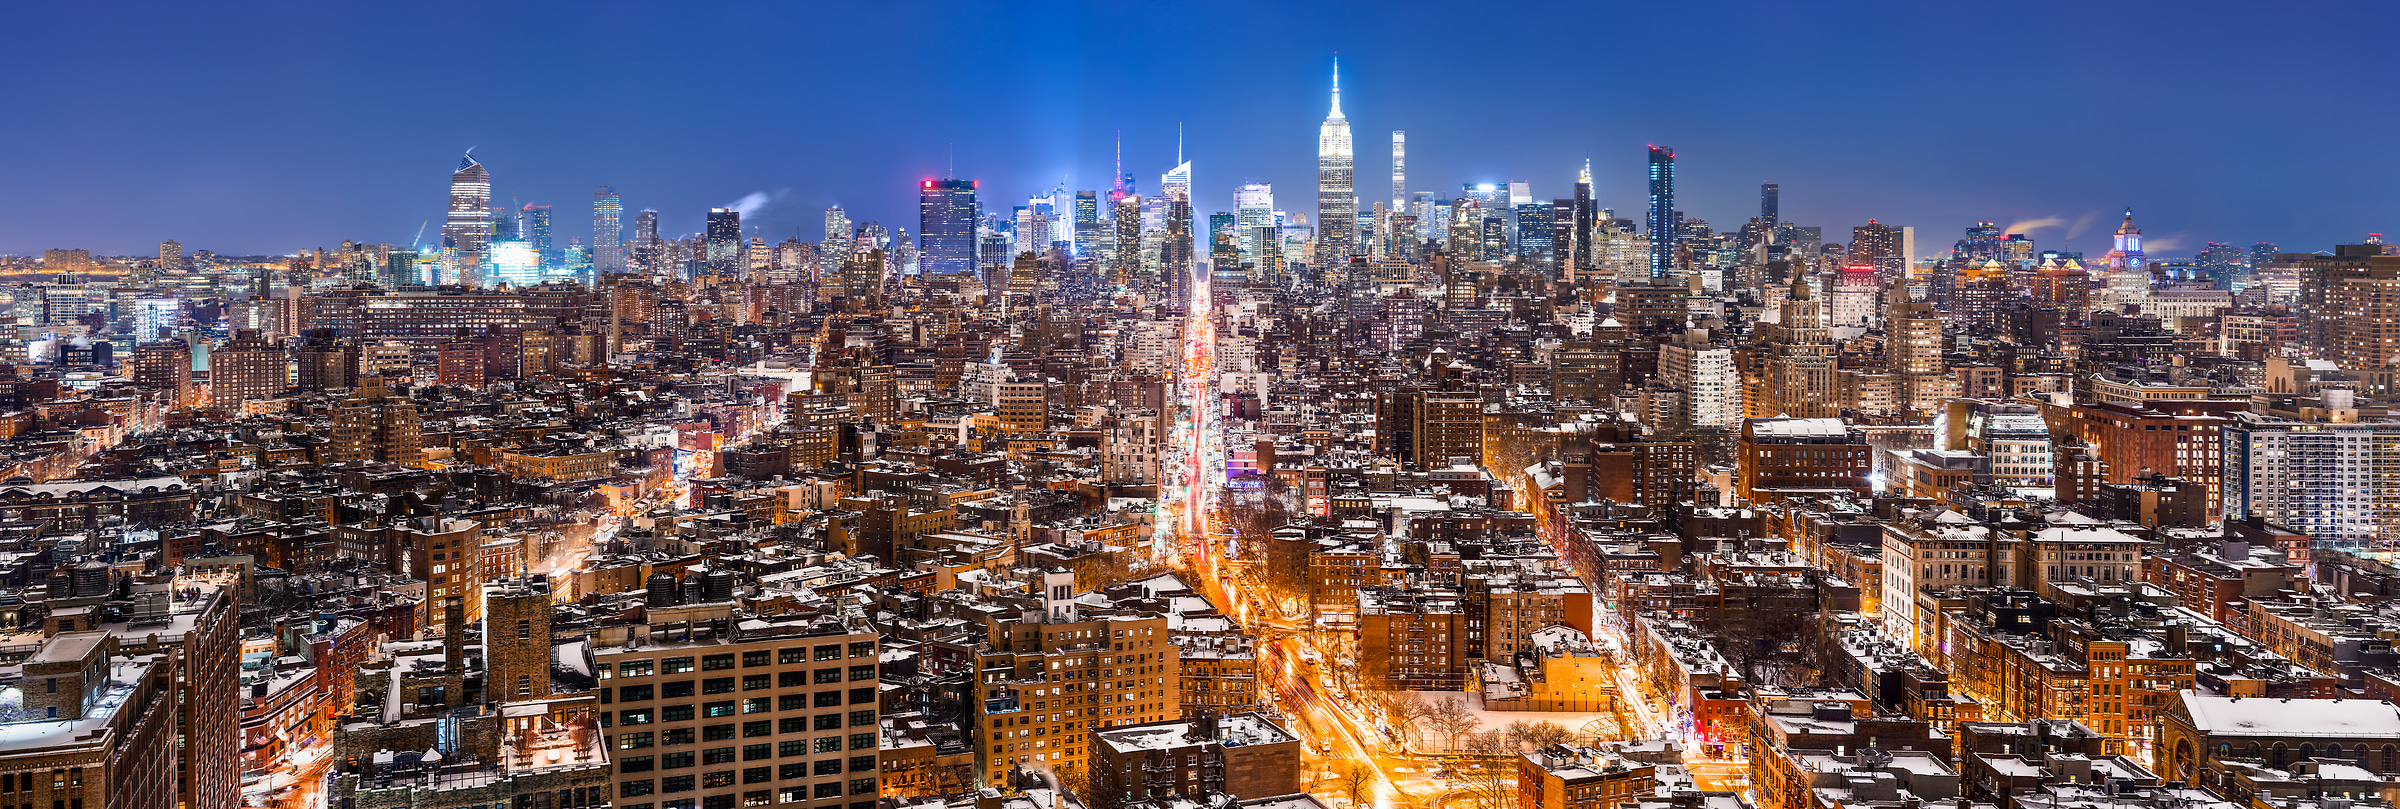 5,910 megapixels! A very high resolution, large-format VAST photo print of the NYC skyline in winter snow at night; cityscape fine art photo created by Dan Piech in New York City.